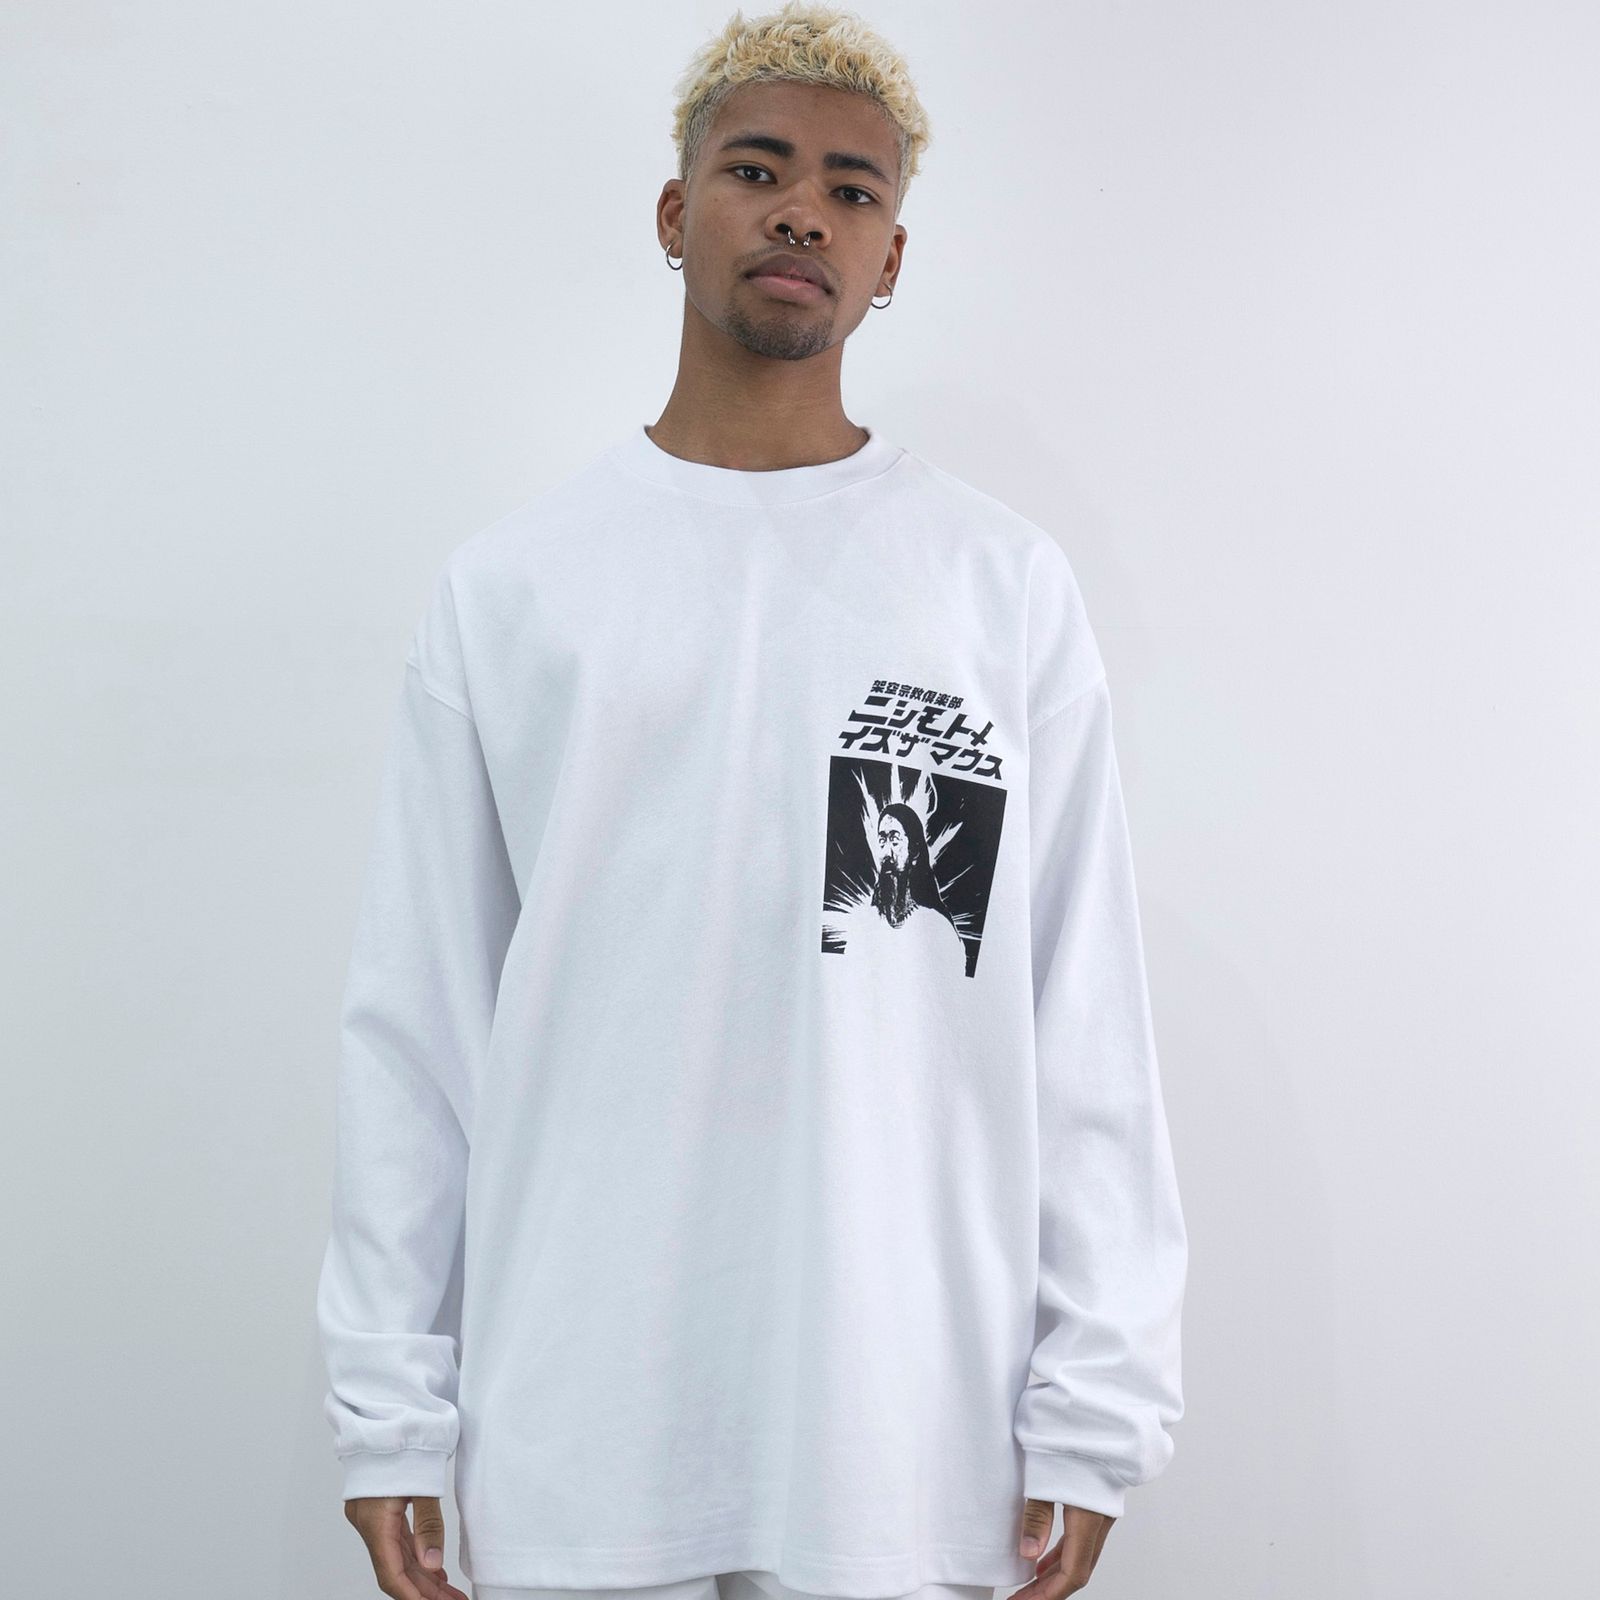 NISHIMOTO IS THE MOUTH - 【残りわずか】Comic L/S Tee | ACRMTSM 